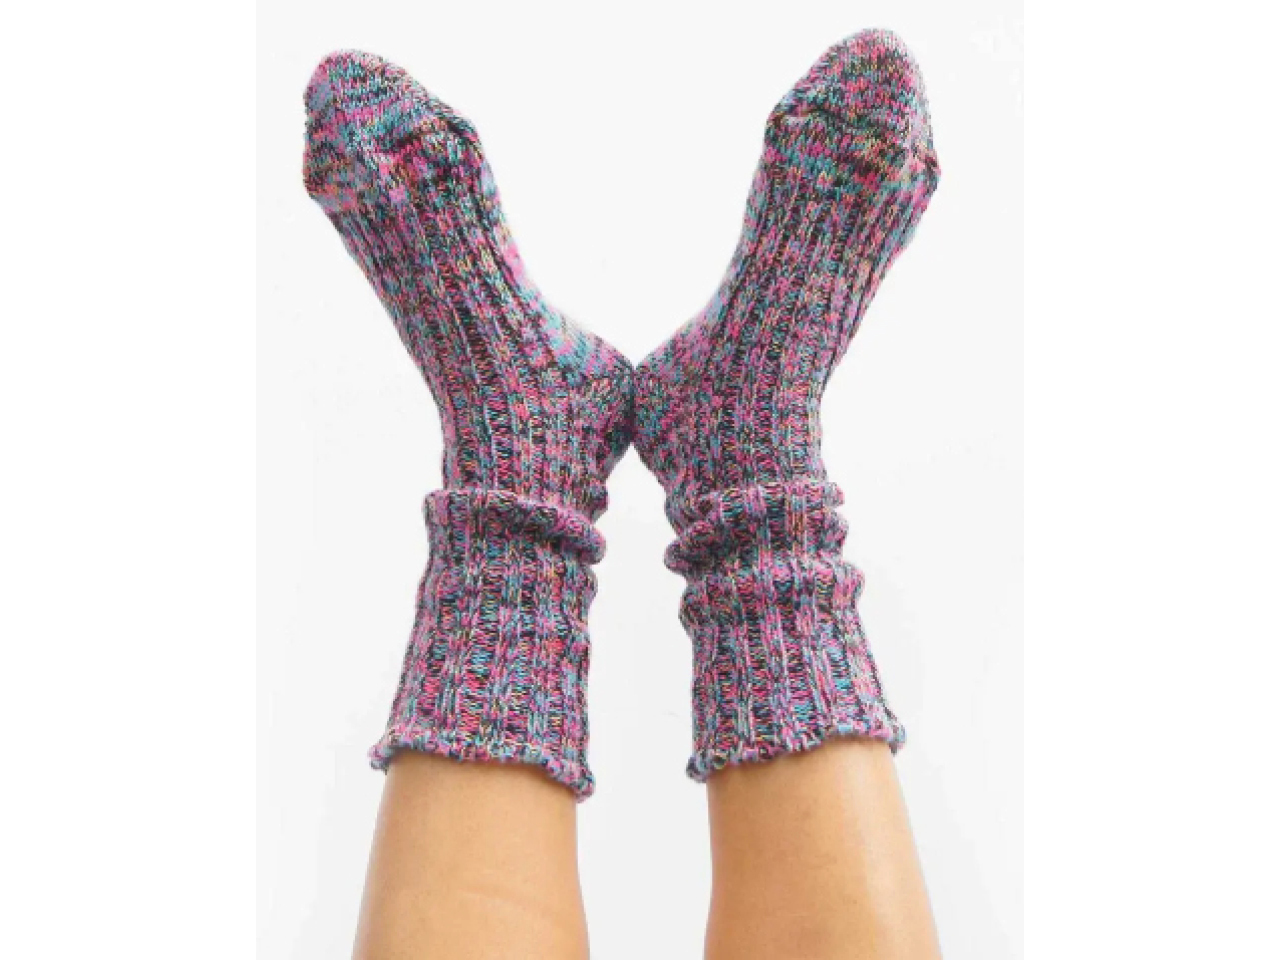 A pair of pink knit Okayok socks as part of our best black friday deals.